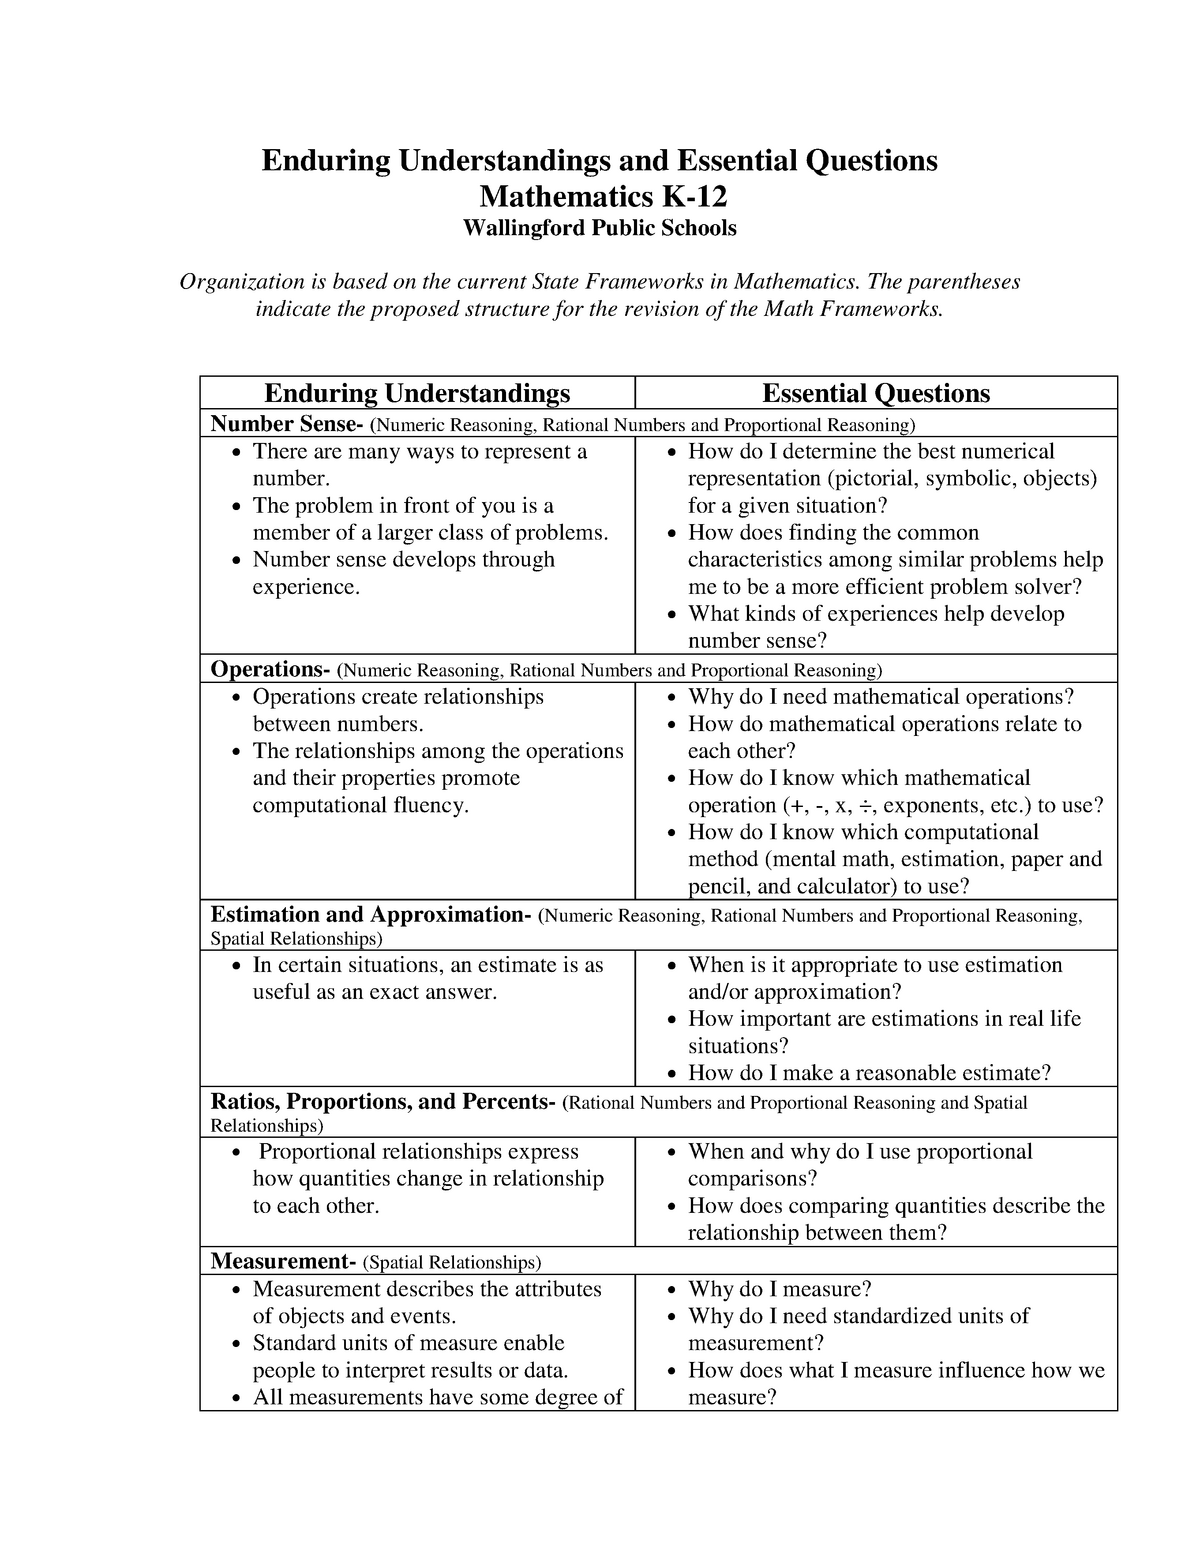 math-k-12-enduring-understandings-and-essential-questions-enduring